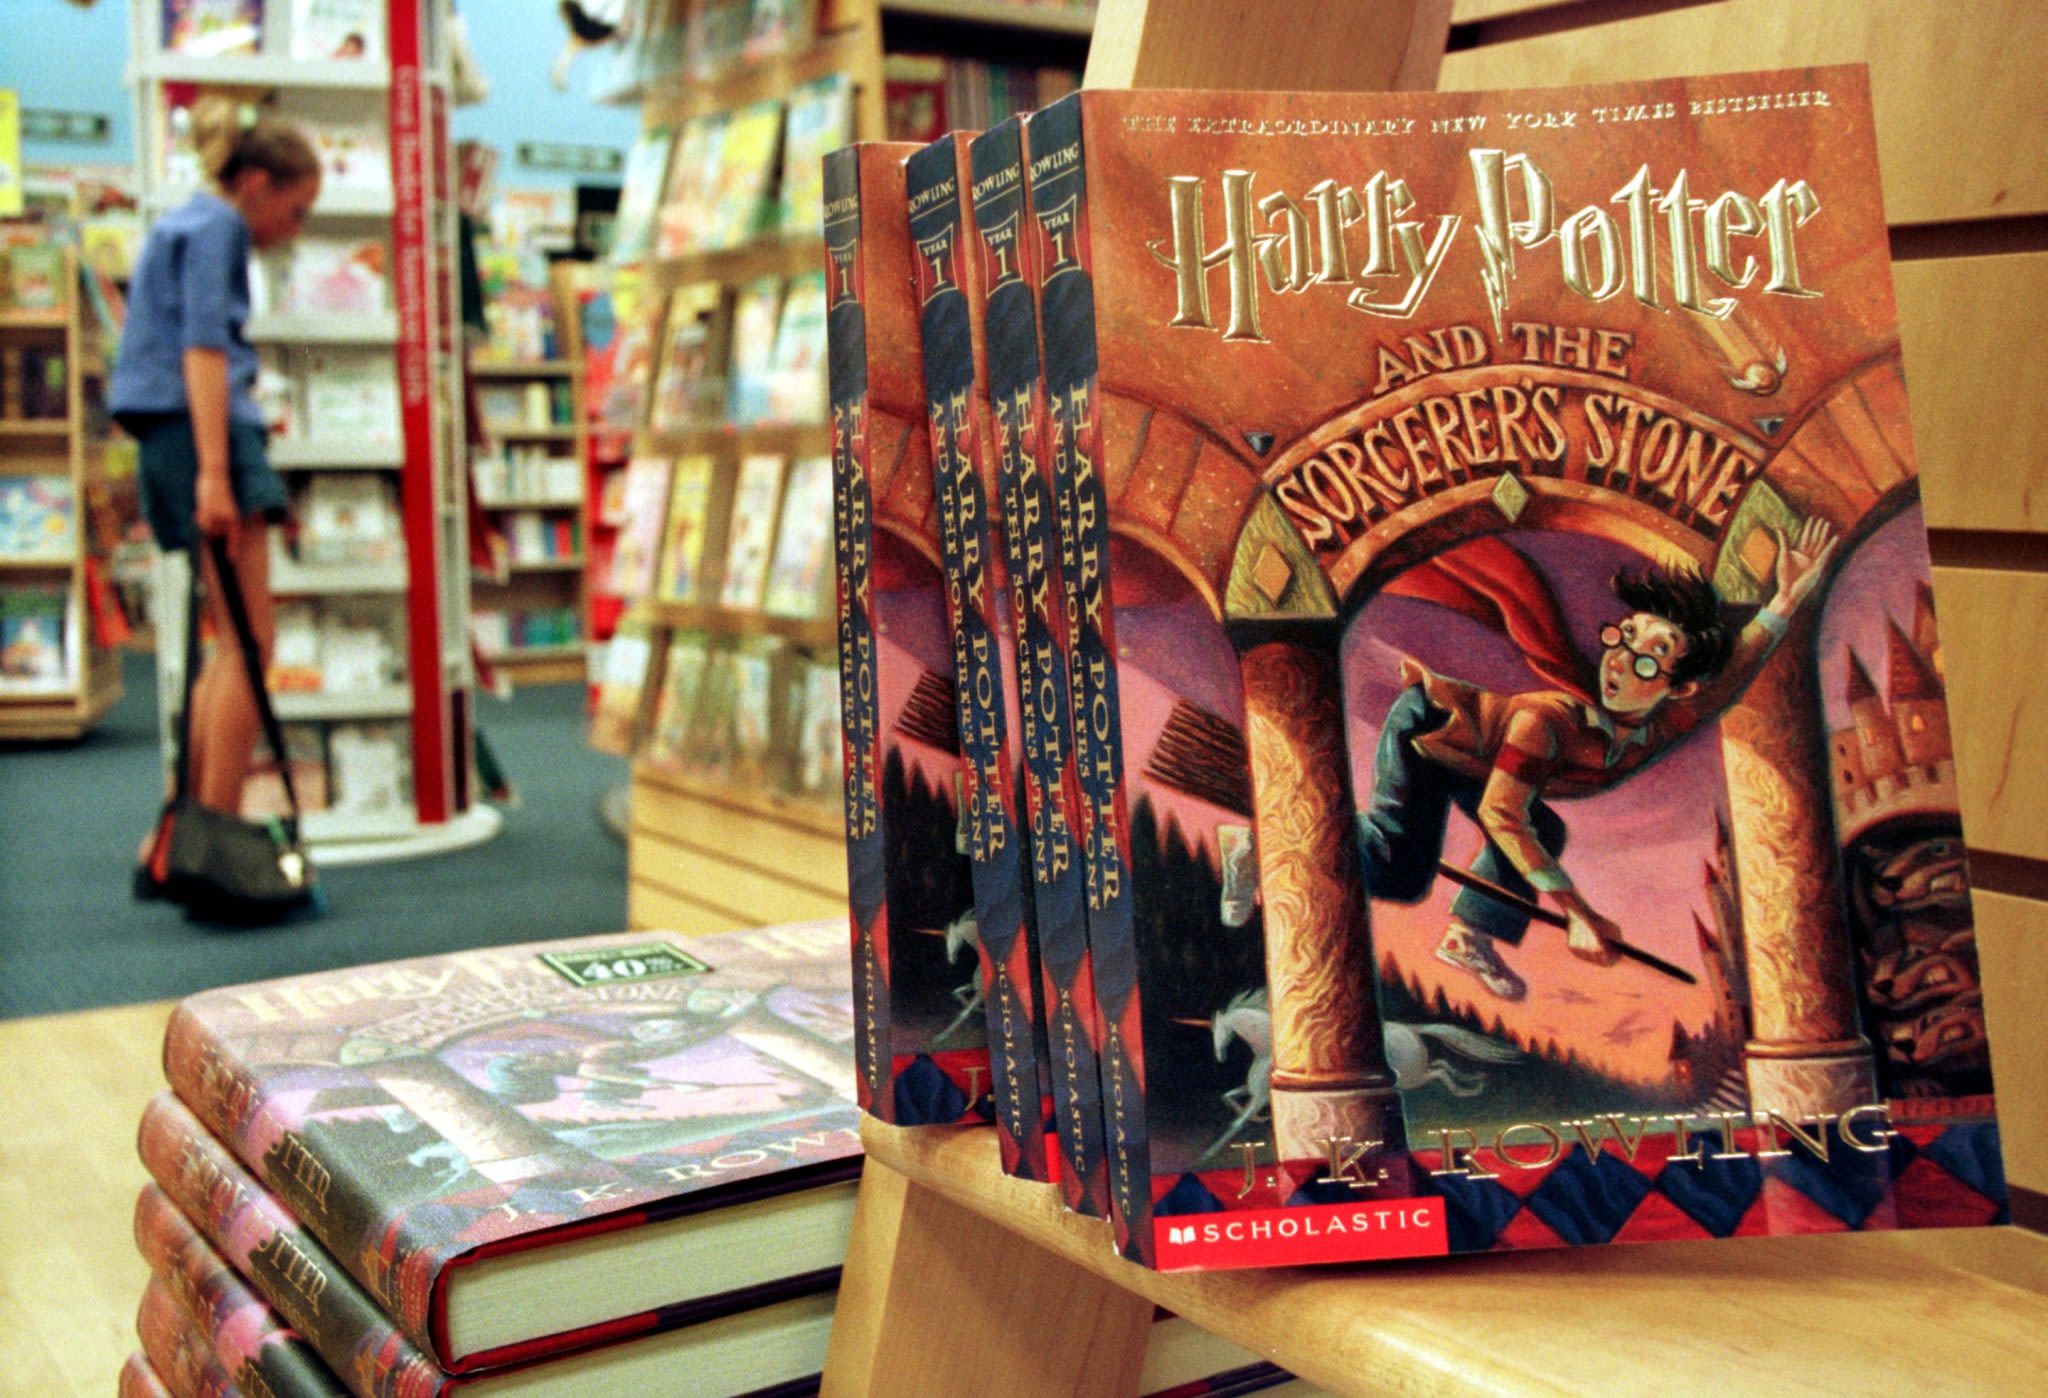 The British publisher behind the ‘Harry Potter’ series had record sales and profits last year, proving physical books and loyal fans can still make big money